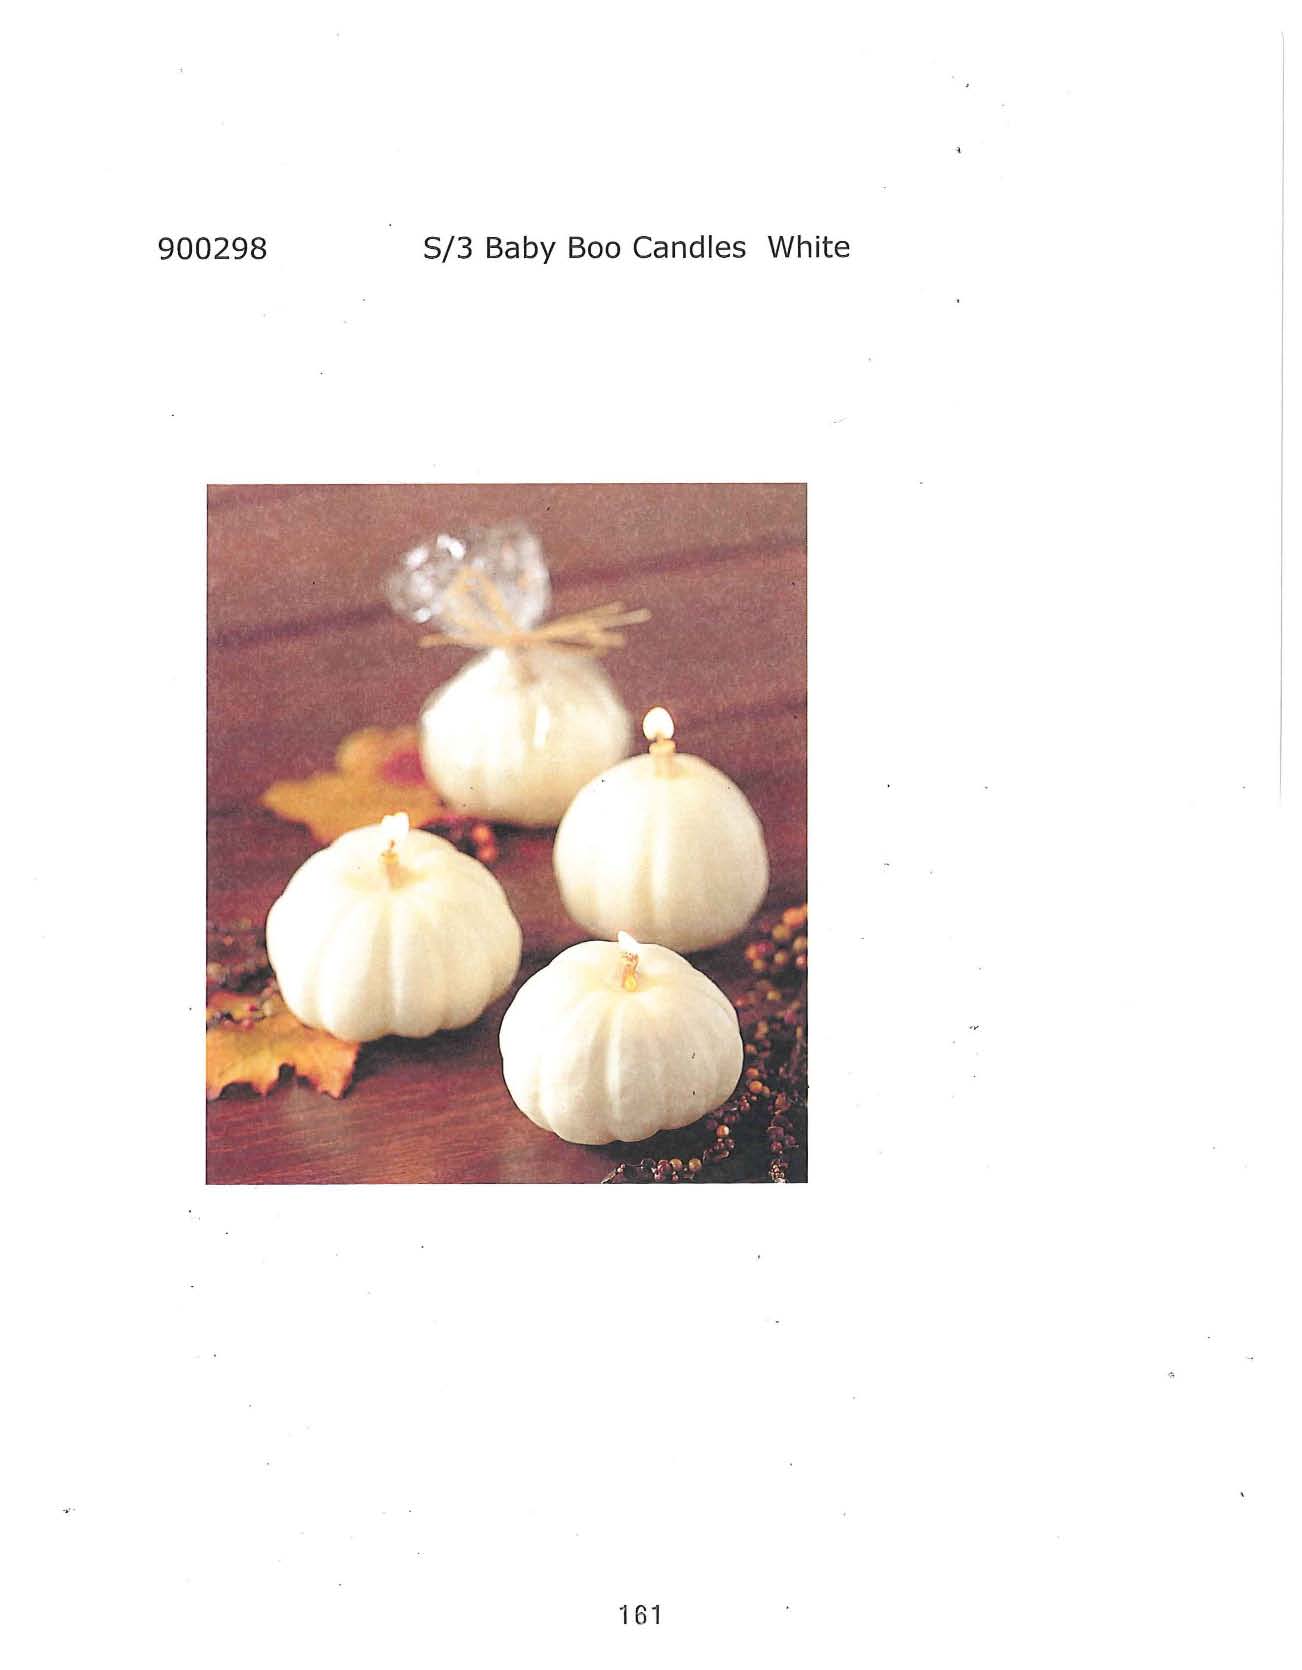 Baby Boo Pumpkin Candle s/3 - White